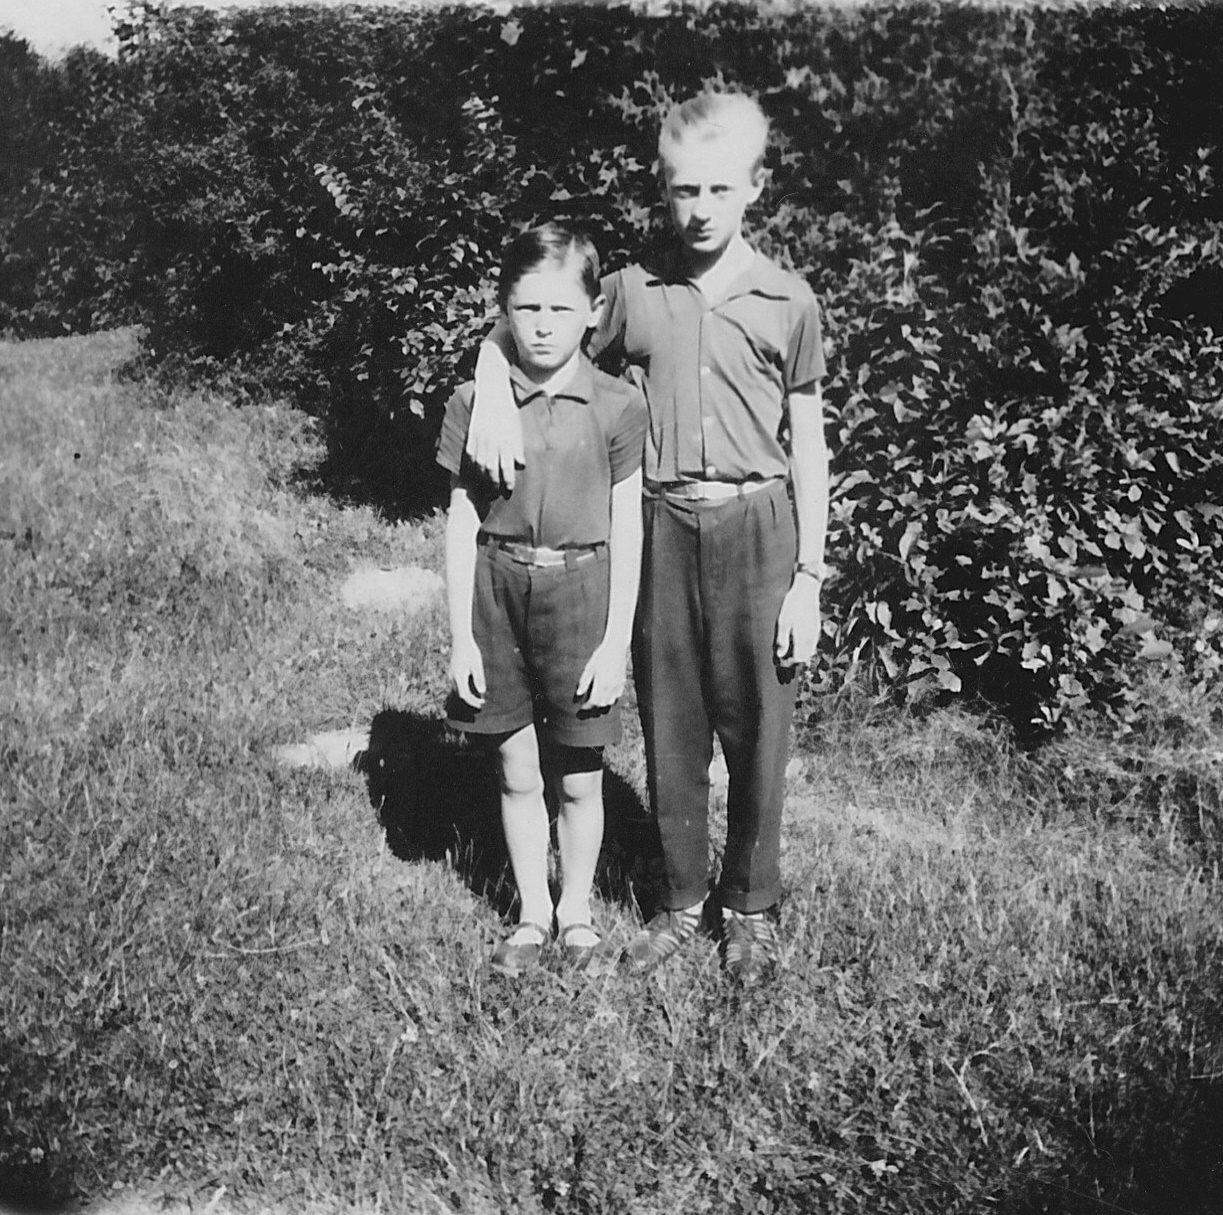 Ted on the left with me (Stan) on the right.<br />
Cir. 1957-58, Poland.